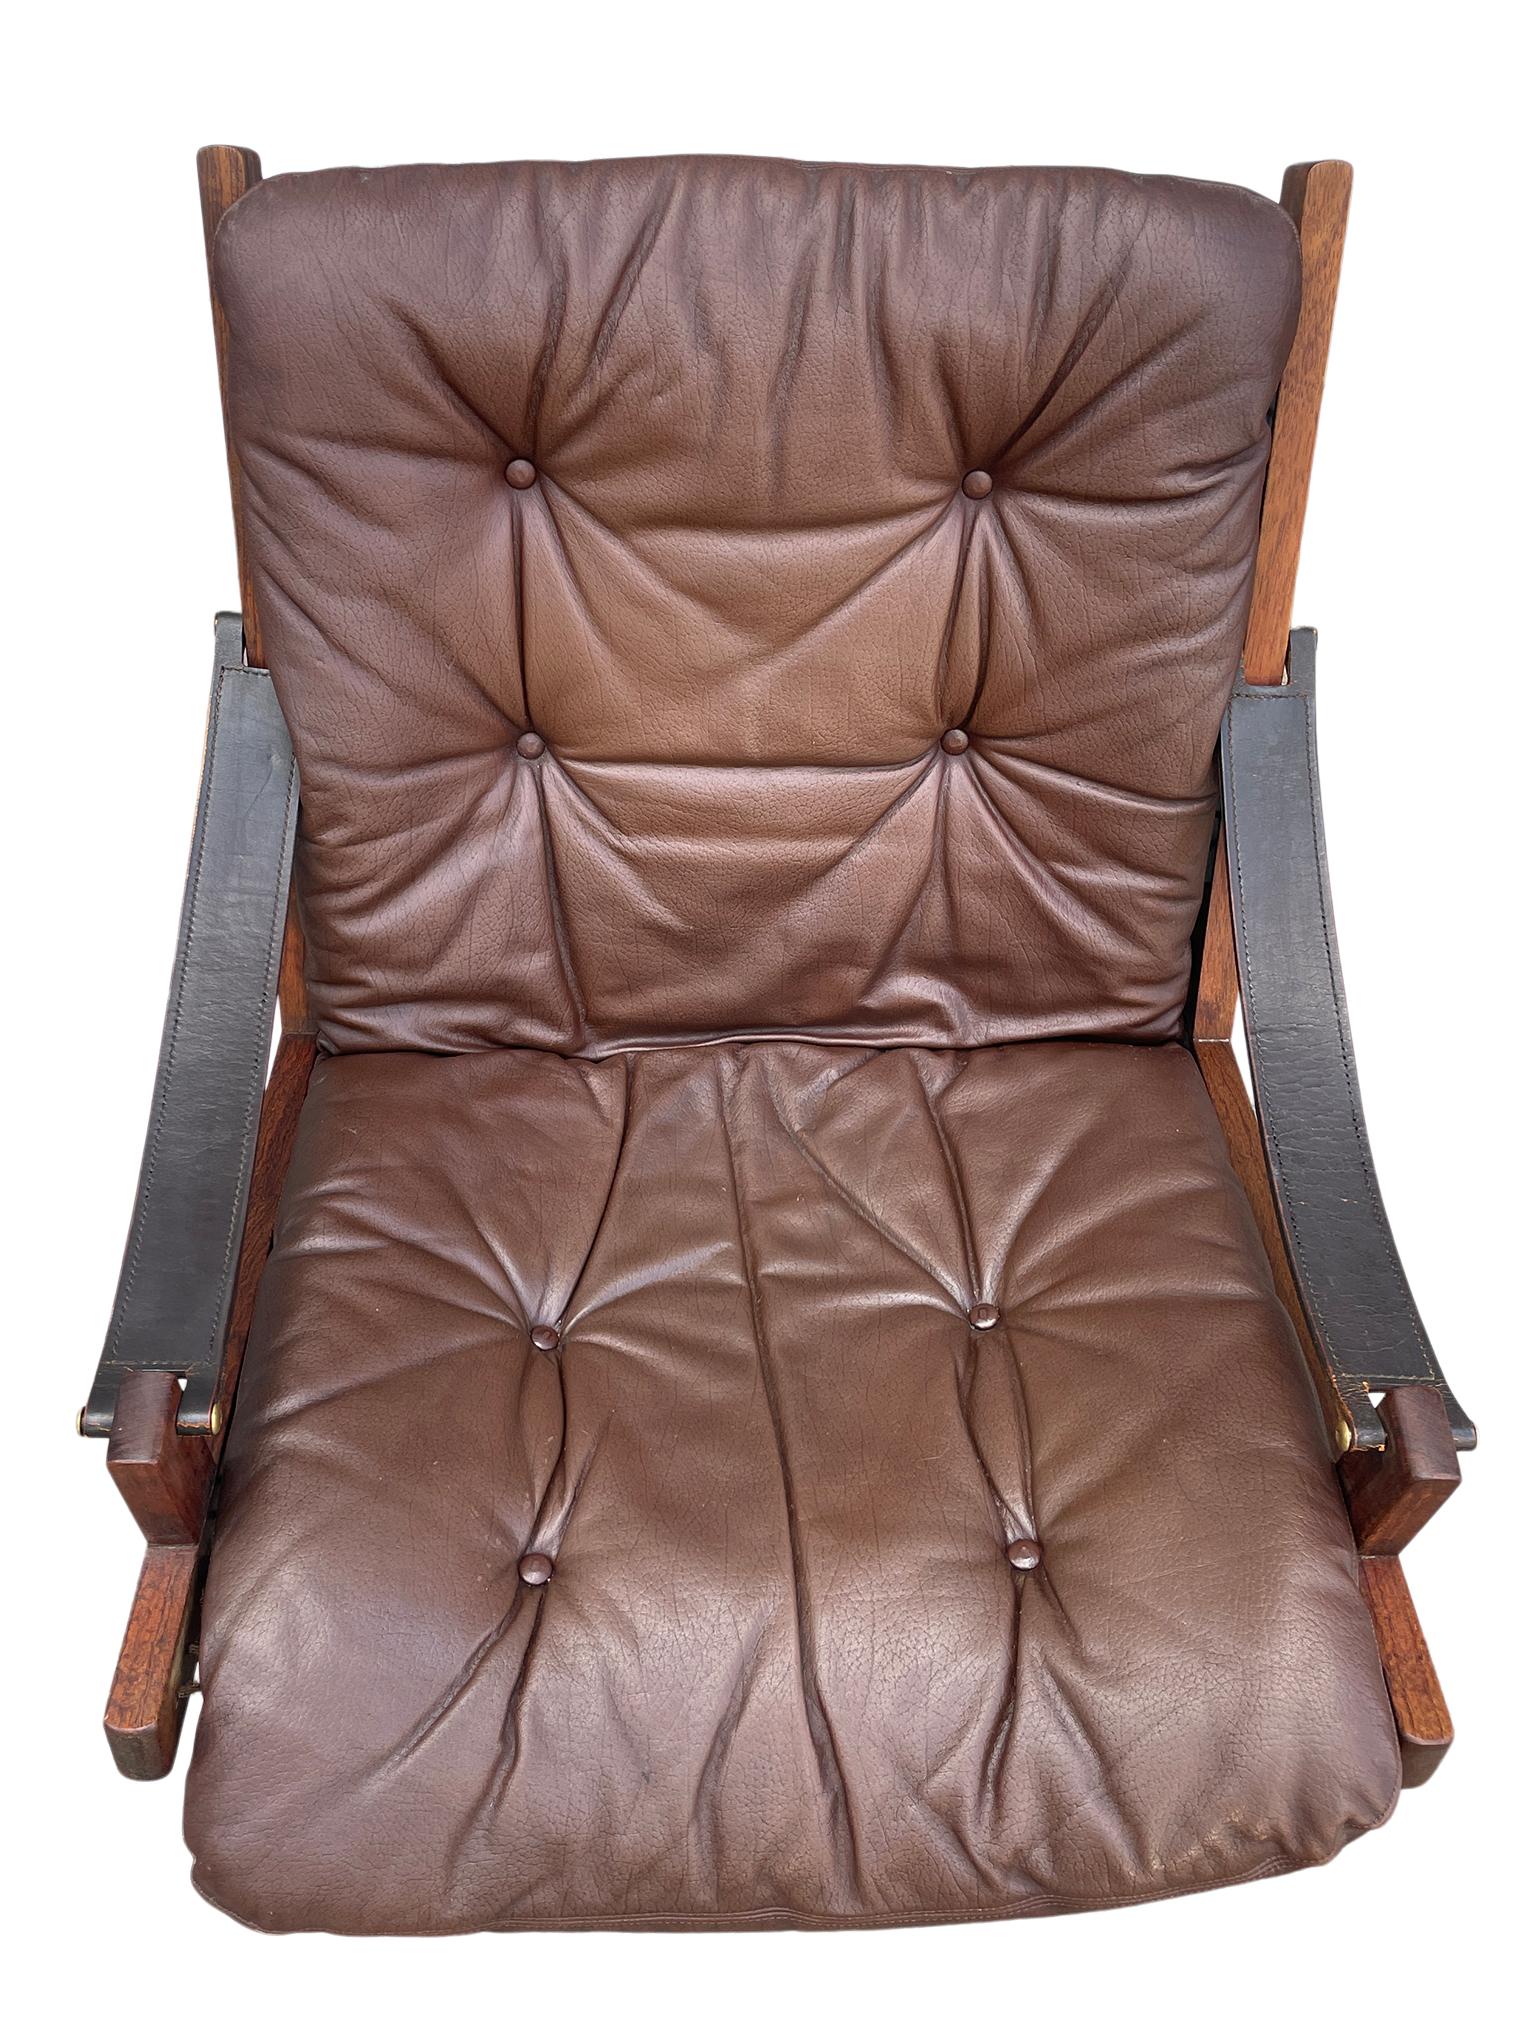 Brown leather “Hunter” Safari low lounge chair by Torbjørn Afdal for Bruksbo circa 1960. Solid rosewood frame with strung brown canvas back. Black belt leather arms with brass hardware. Soft dark brown leather seat cushions. All original beautiful